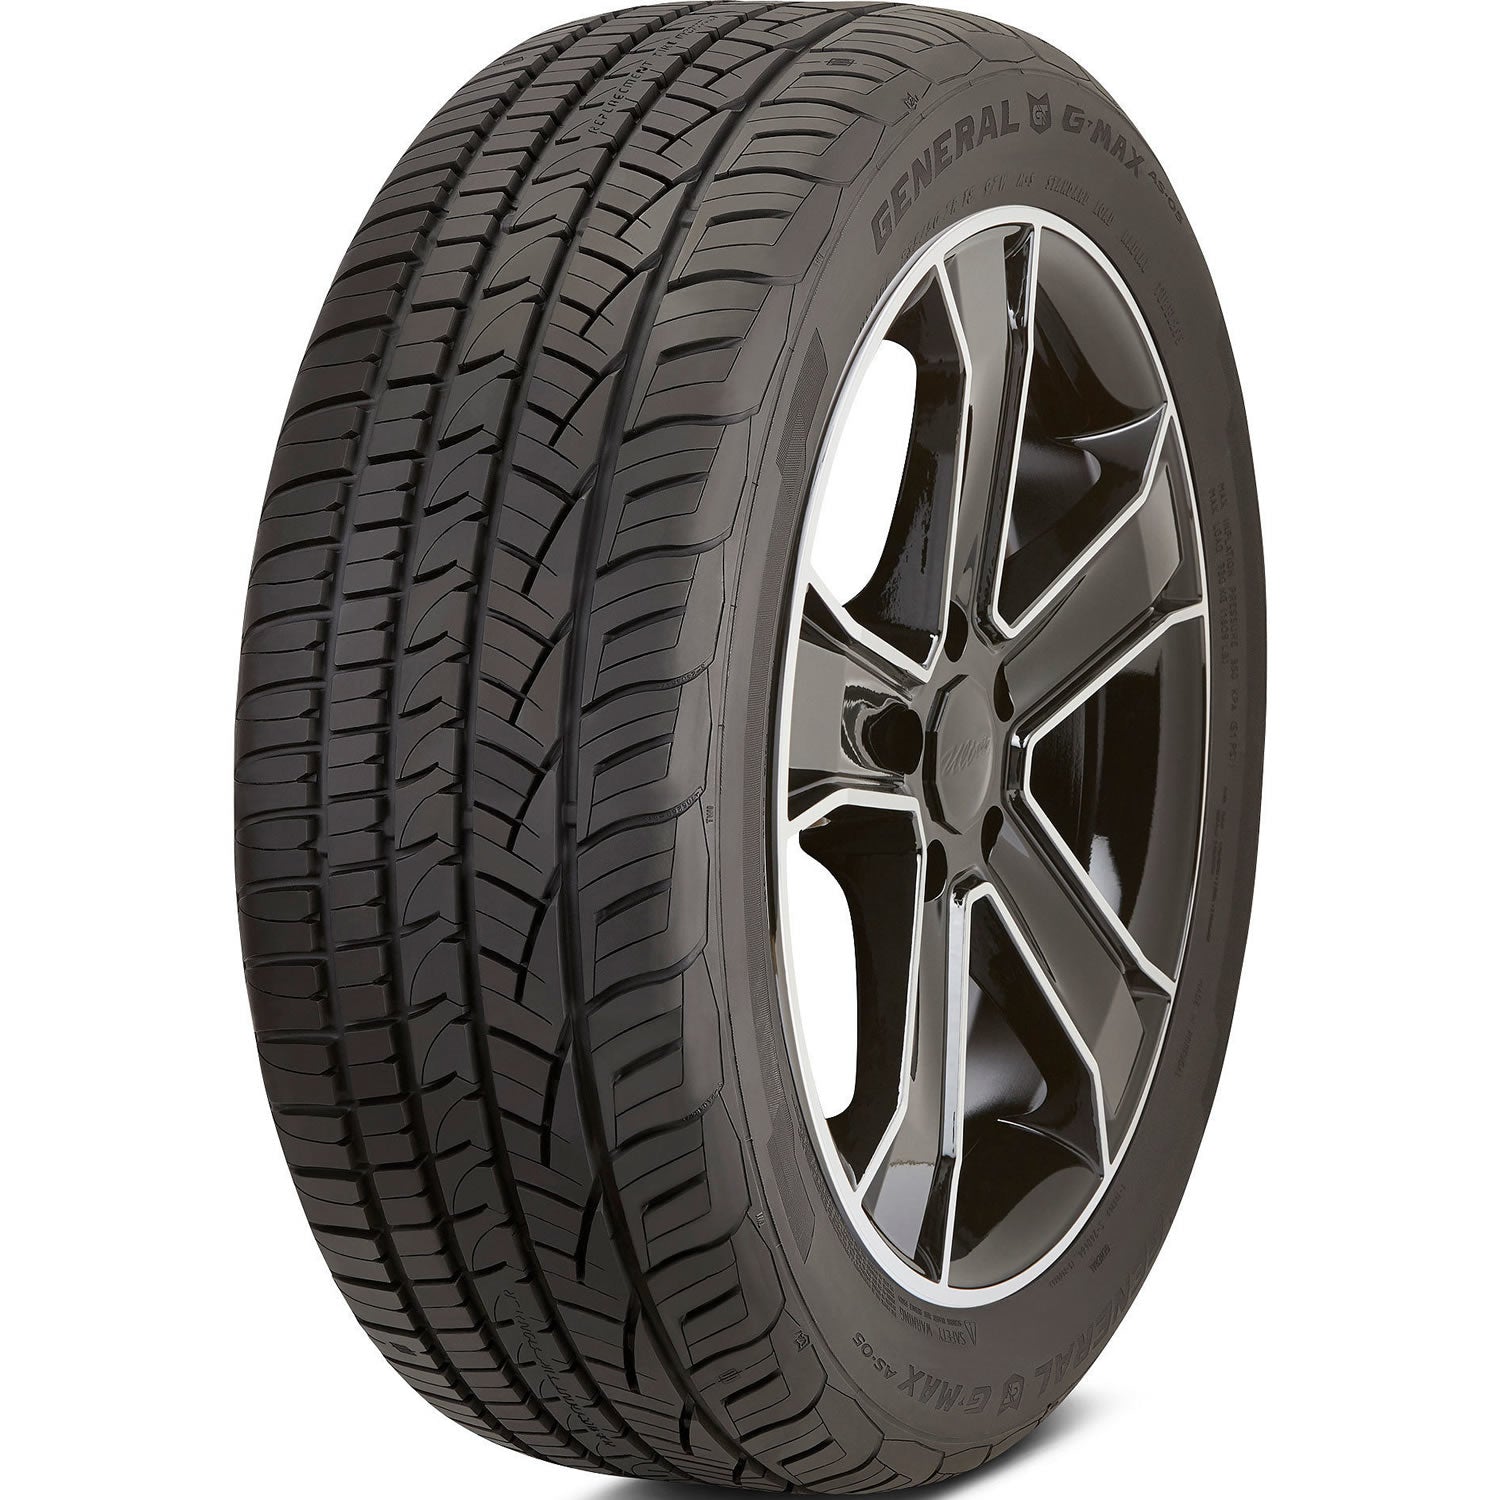 GENERAL G-MAX AS-05 205/50ZR17 (25.1X8.1R 17) Tires